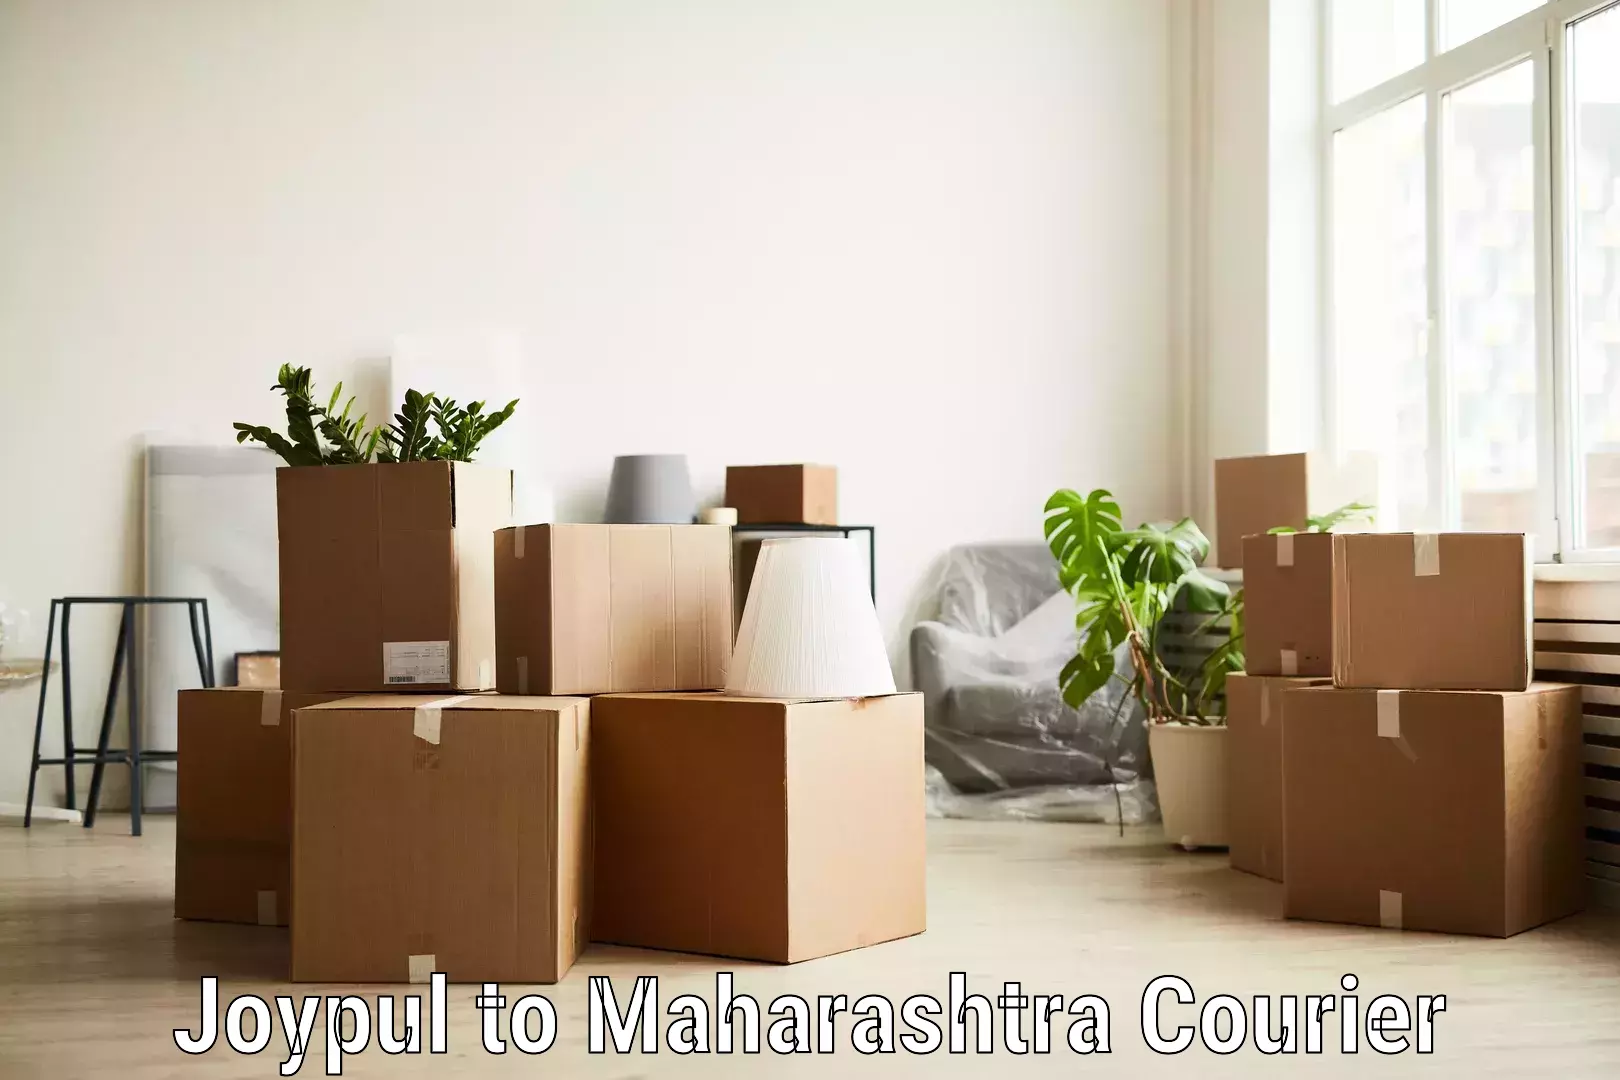 Residential courier service in Joypul to Maharashtra